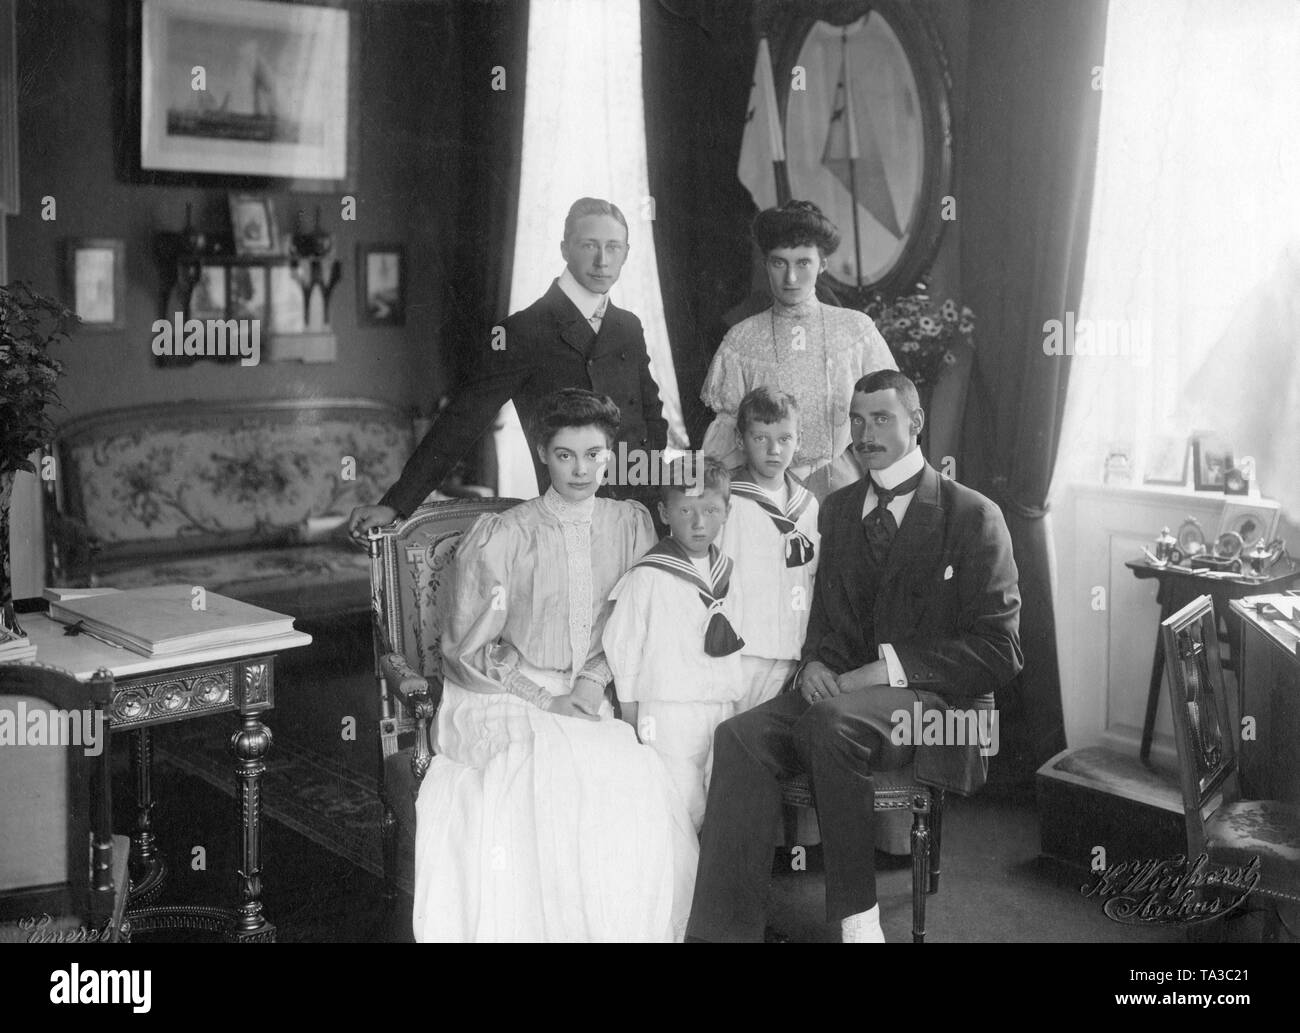 Crown Prince Wilhelm of Prussia and his wife Crown Princess Cecilie visiting Cecilie's sister, Princess Alexandrine, and her husband Prince Christian at Marselisborg Castle near Aarhus (Denmark). From left: Crown Princess Cecilie of Mecklenburg, the Danish princes Frederik and Knut, their father Prince Christian of Denmark. Standing behind the chairs Crown Prince Wilhelm of Prussia (left) and Princess Alexandrine of Mecklenburg (r.). Stock Photo